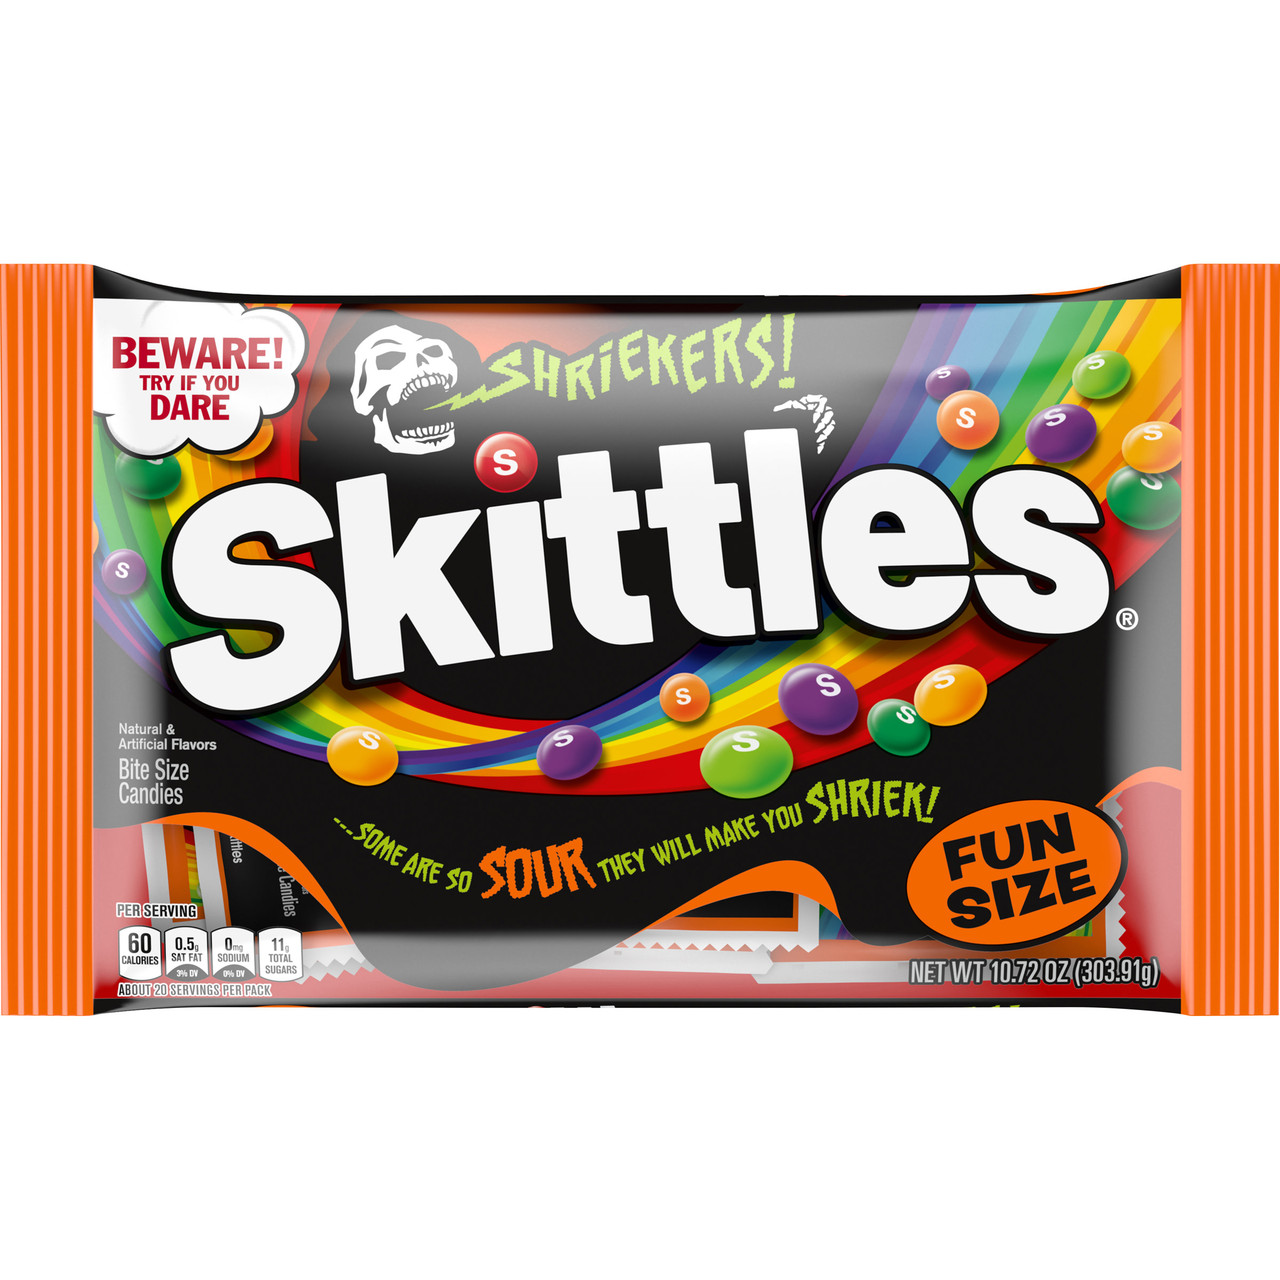 donna guitard reccomend Picture Of Skittles